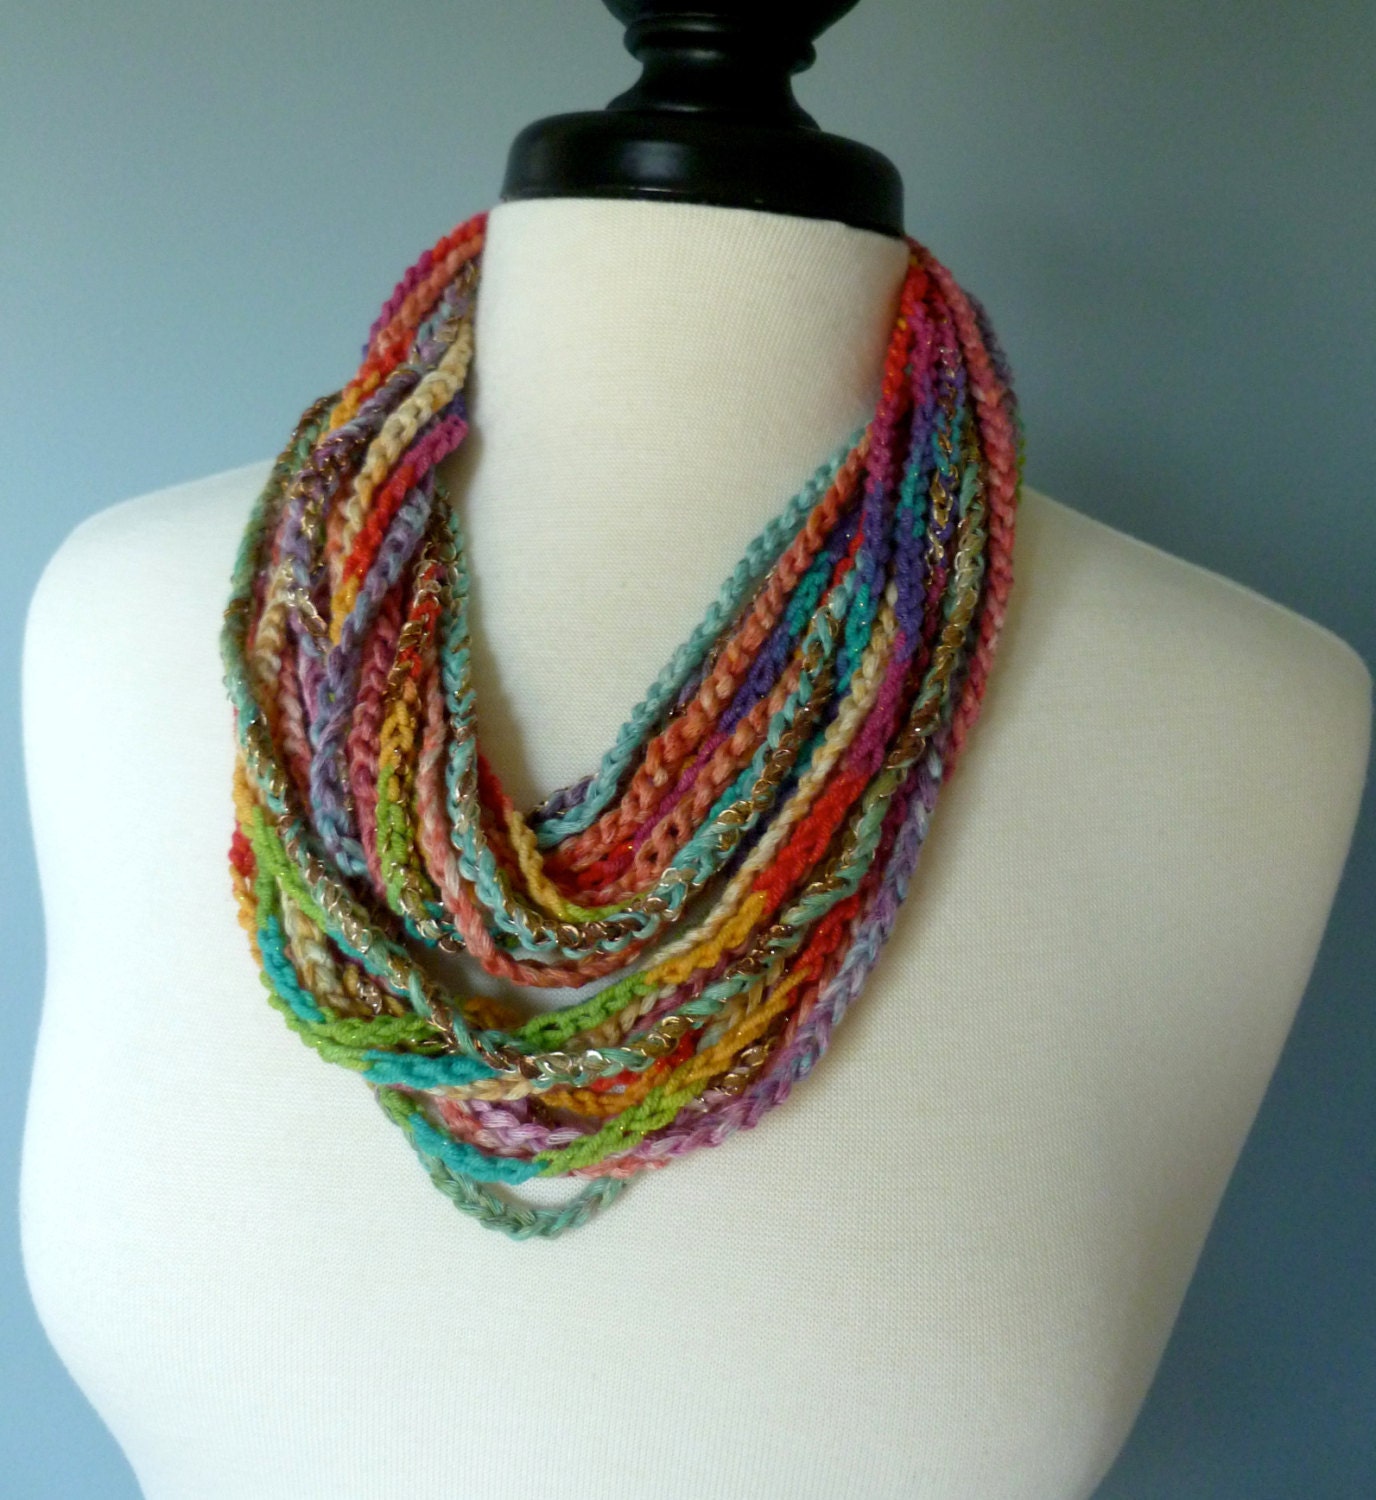 Crocheted Necklace Scarf